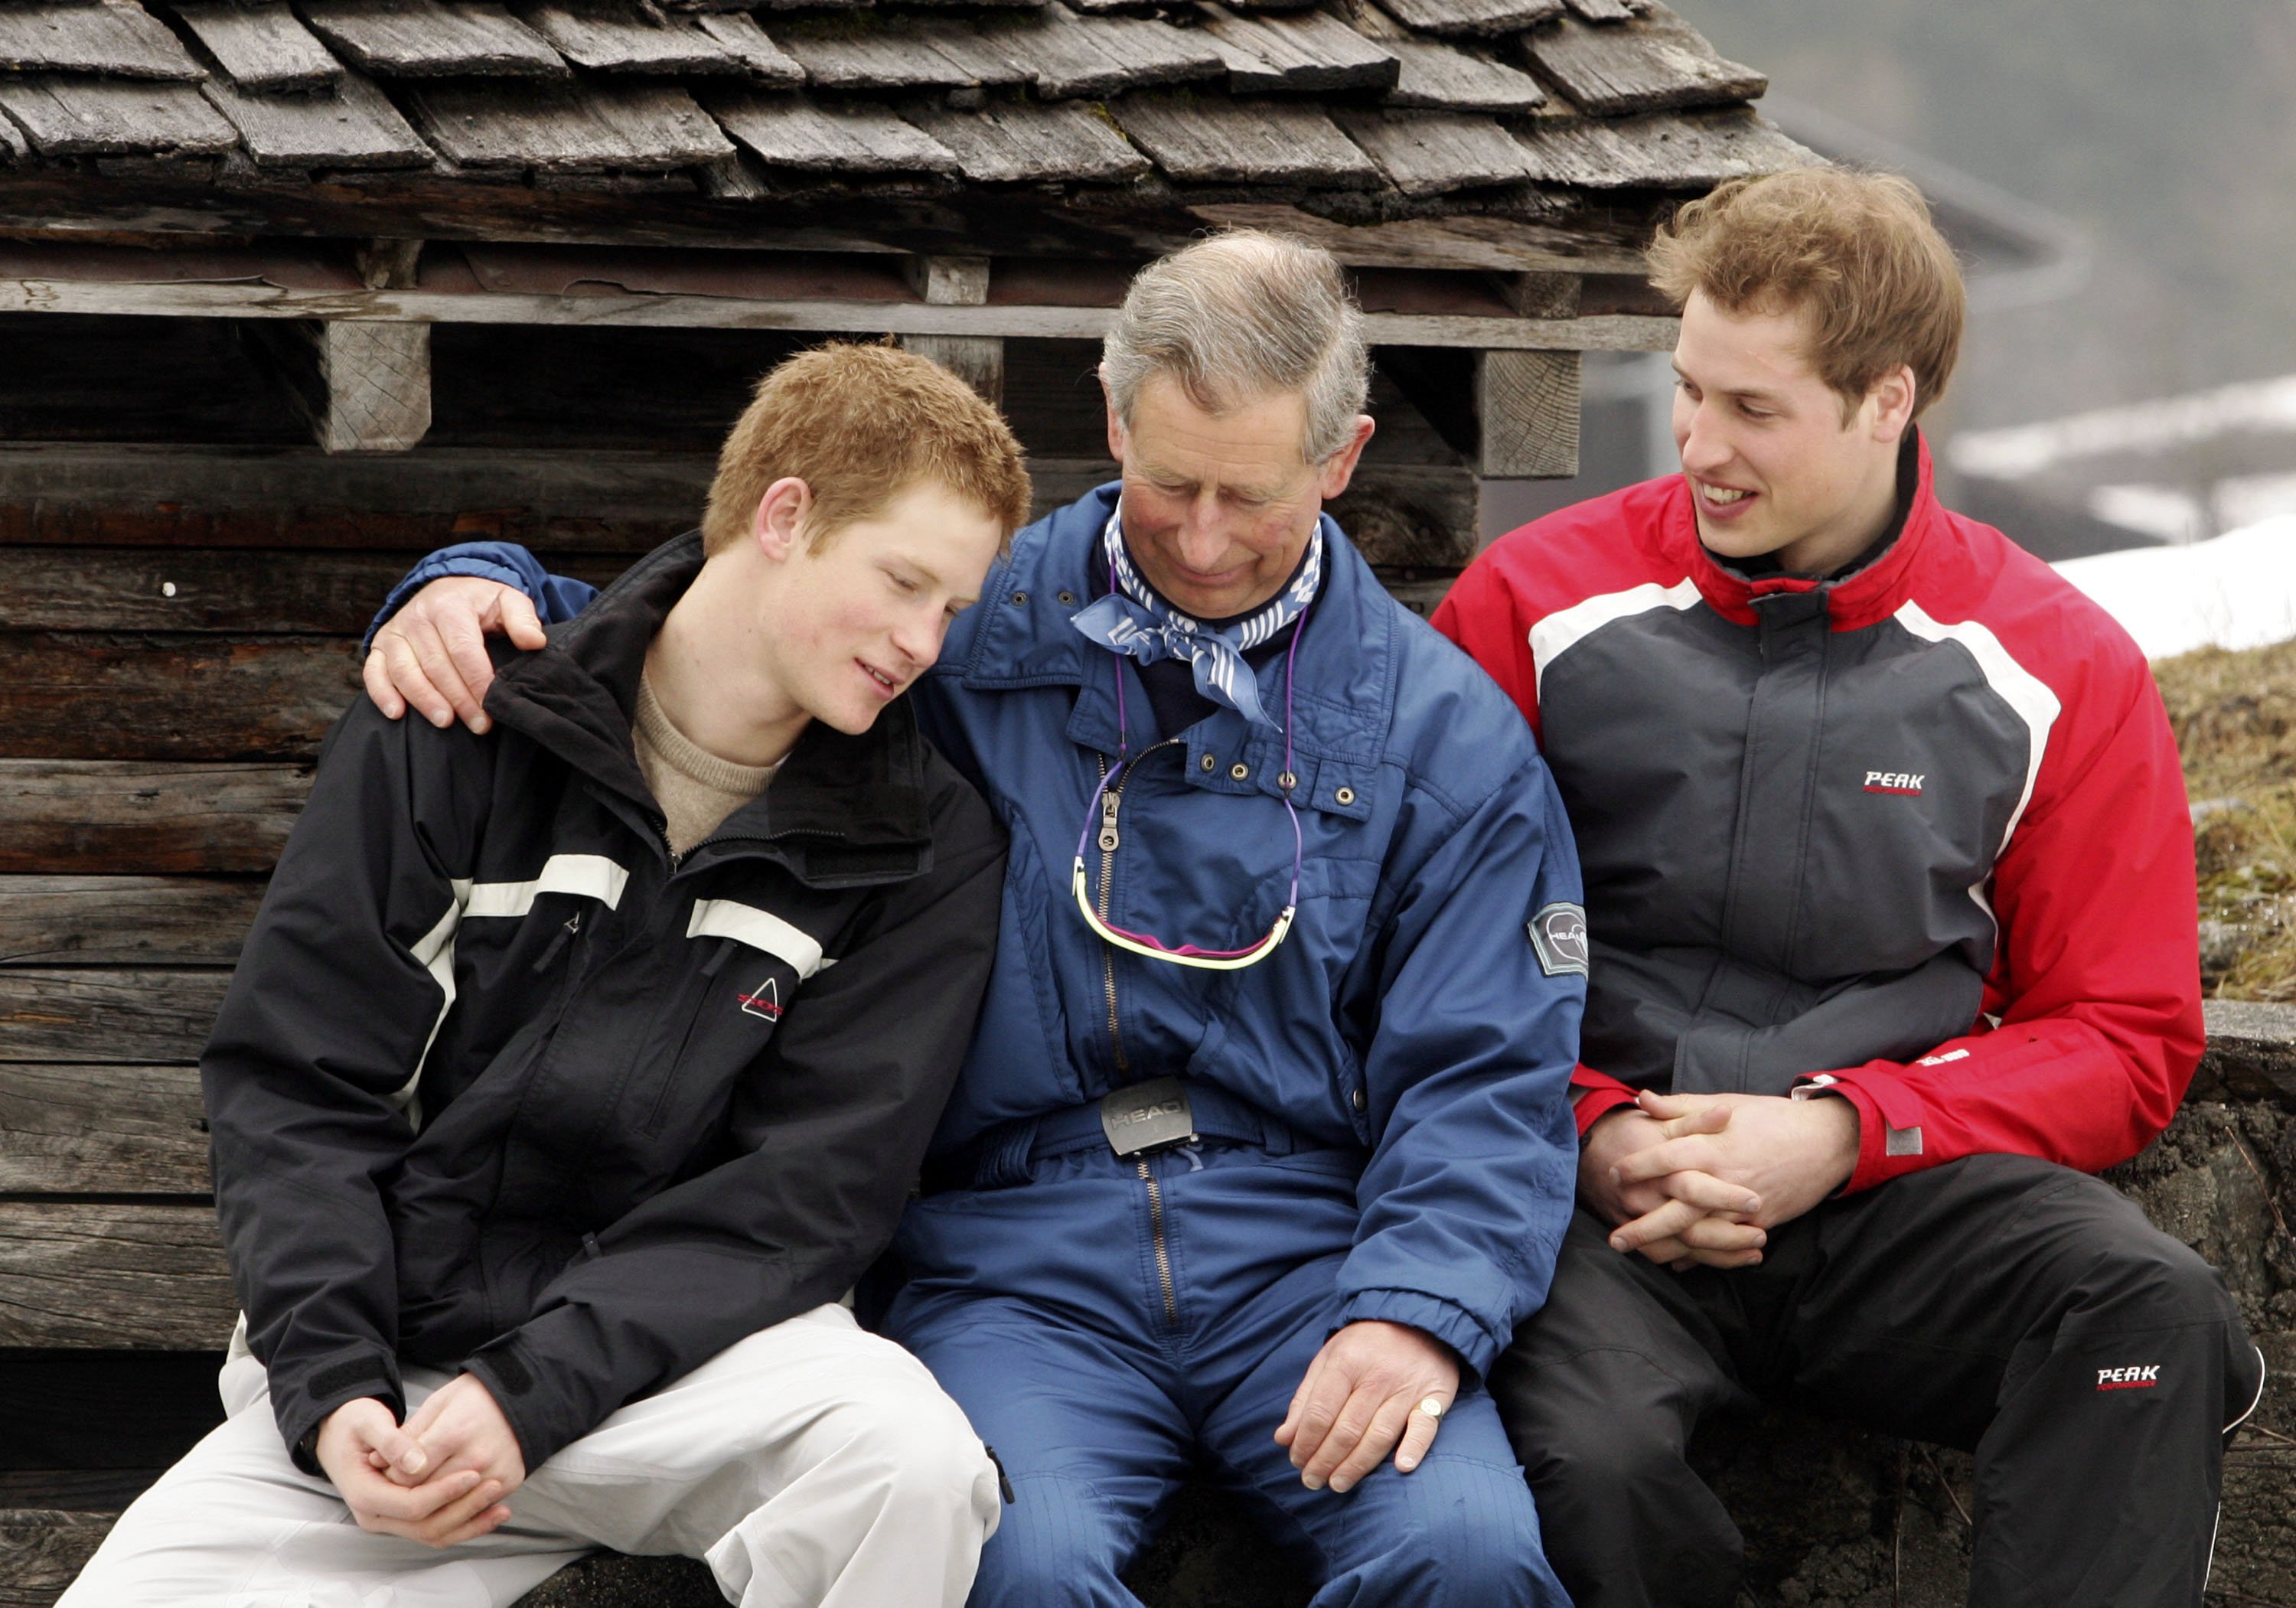 Prince Harry, Prince Charles, and Prince William during the Royal Family's ski break at Klosters on March 31, 2005, in Switzerland | Source: Getty Images